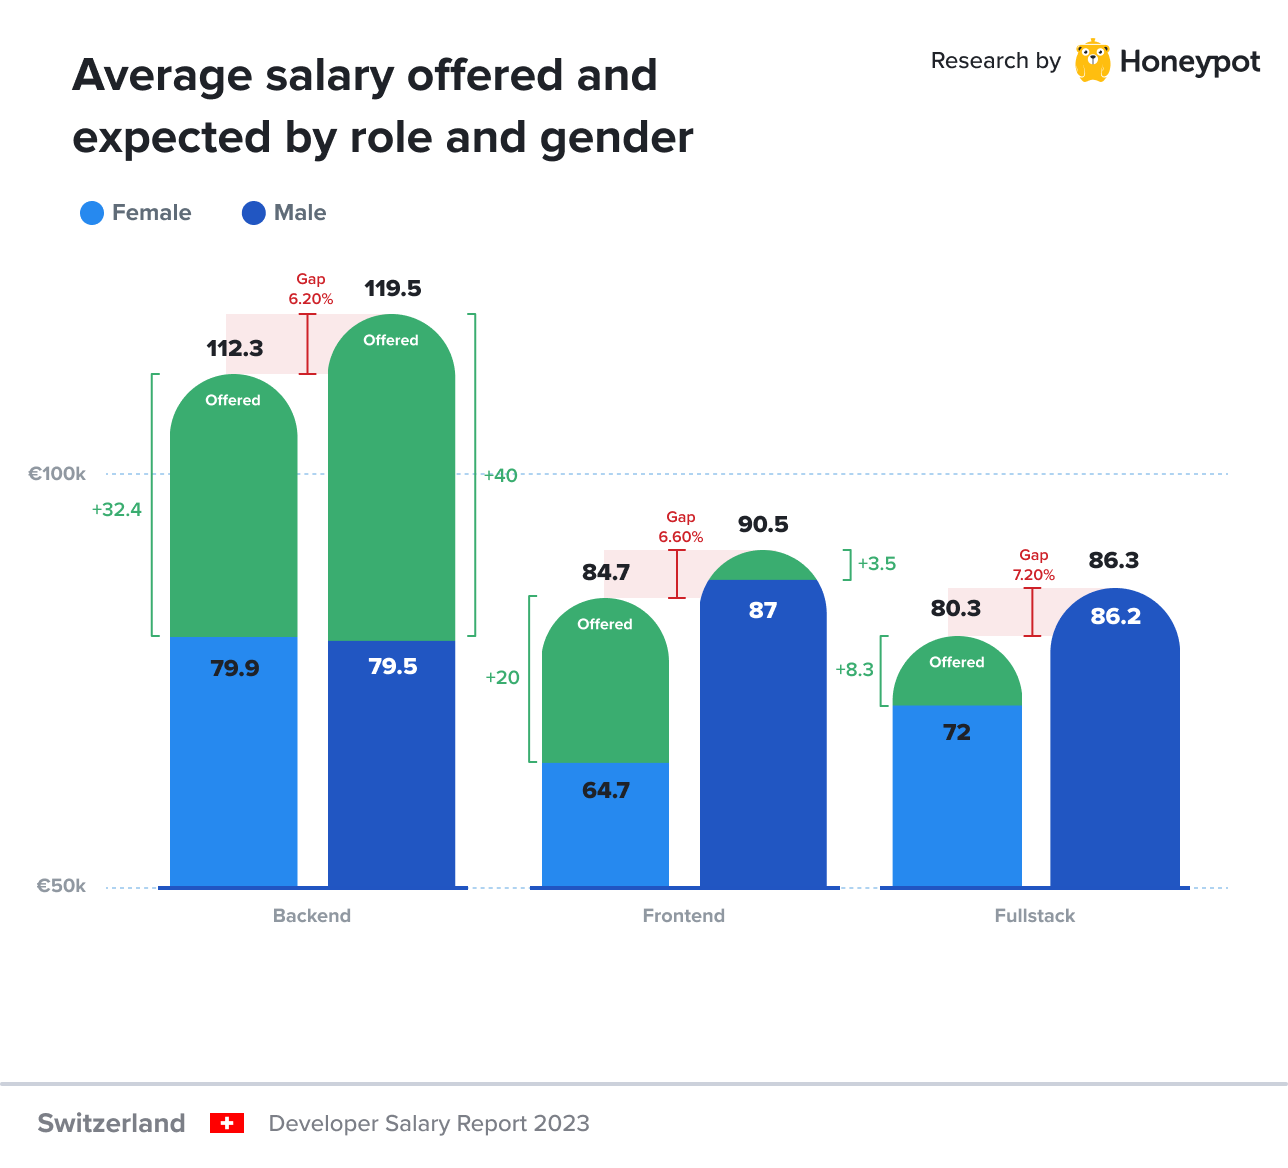 Switzerland – Average offered vs expected salary by role and gender